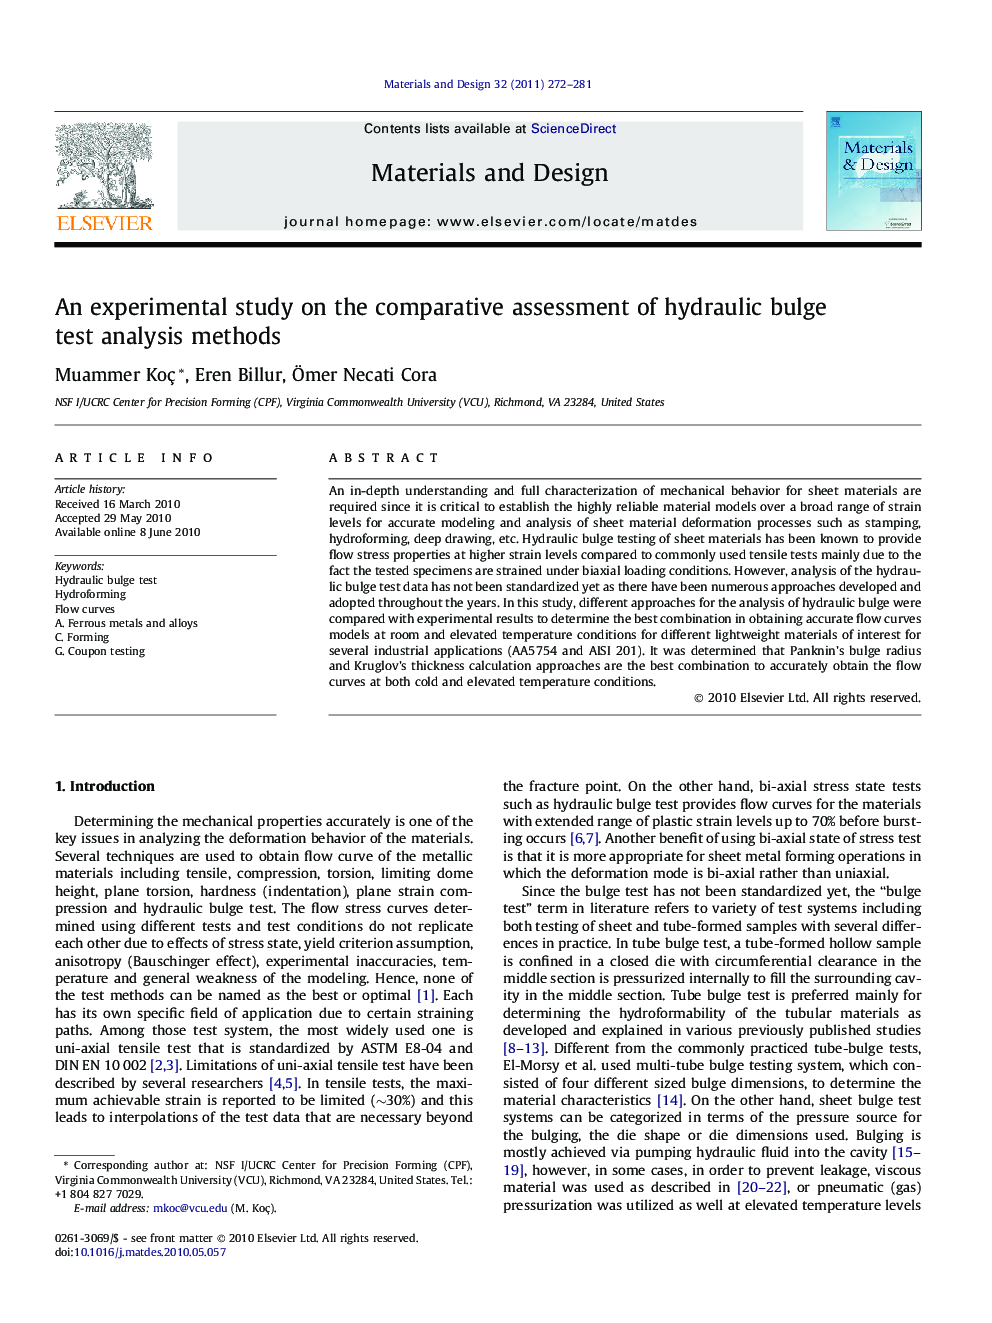 An experimental study on the comparative assessment of hydraulic bulge test analysis methods